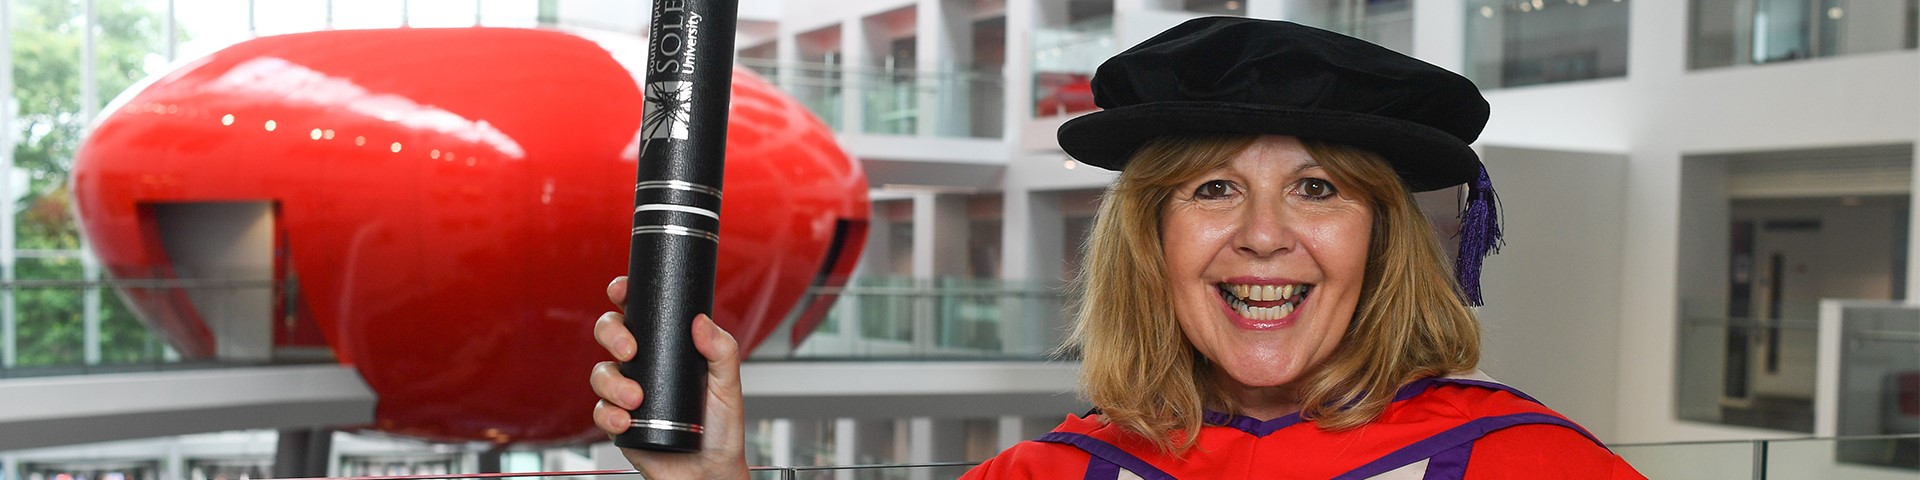 Broadcaster and CEO of TeenTech, Maggie Philbin